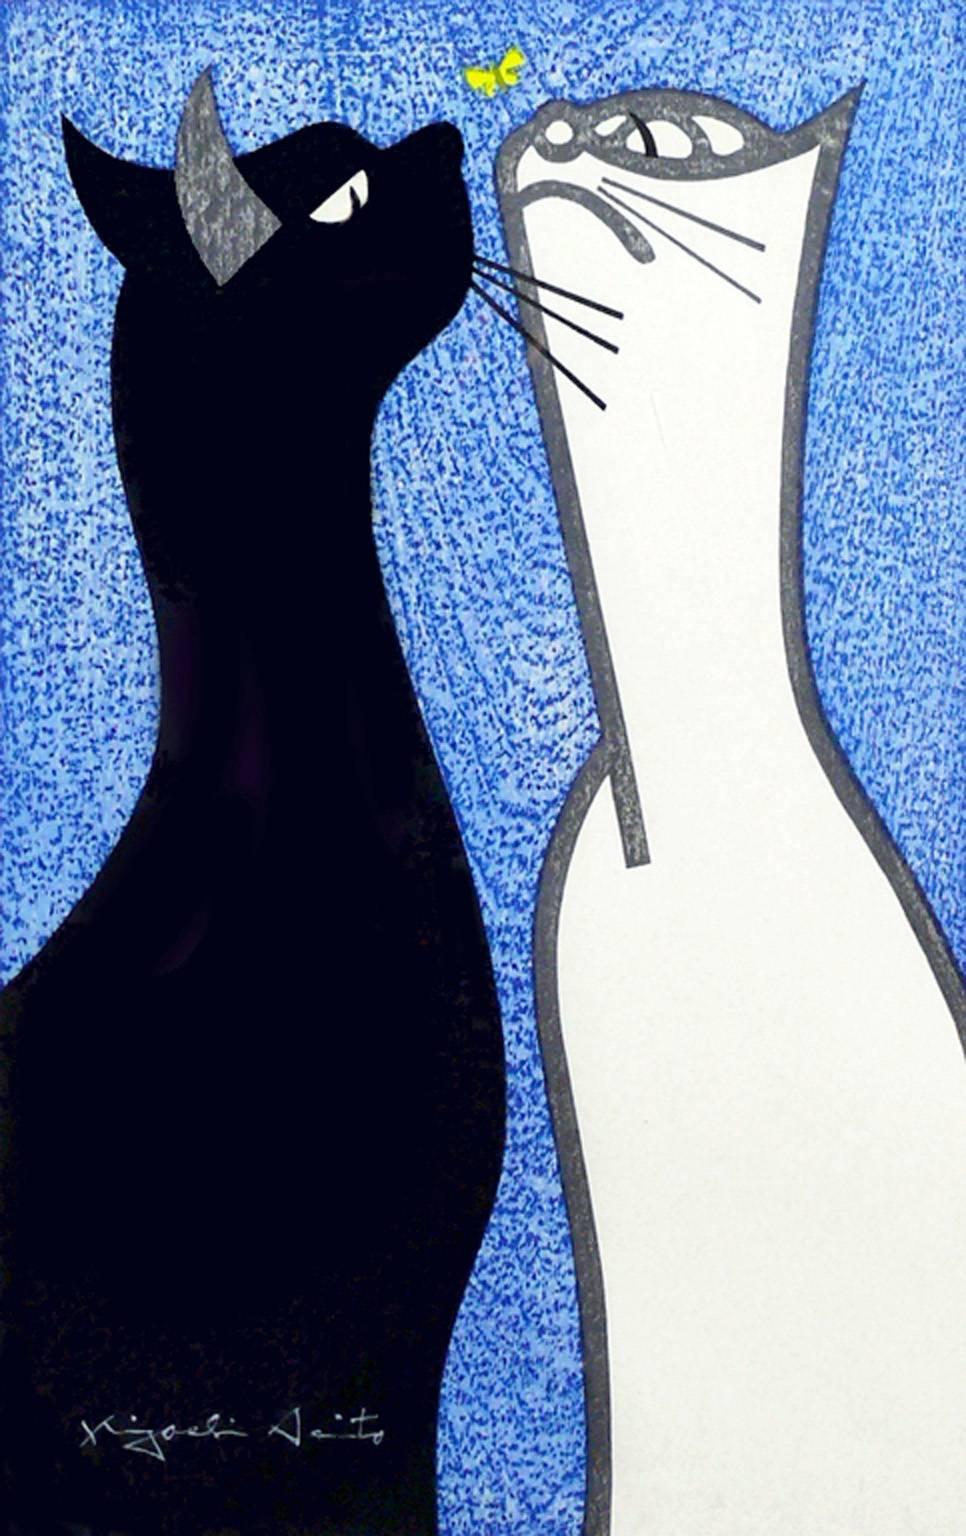 Two cats - black and white against bright blue background. Signed in white.